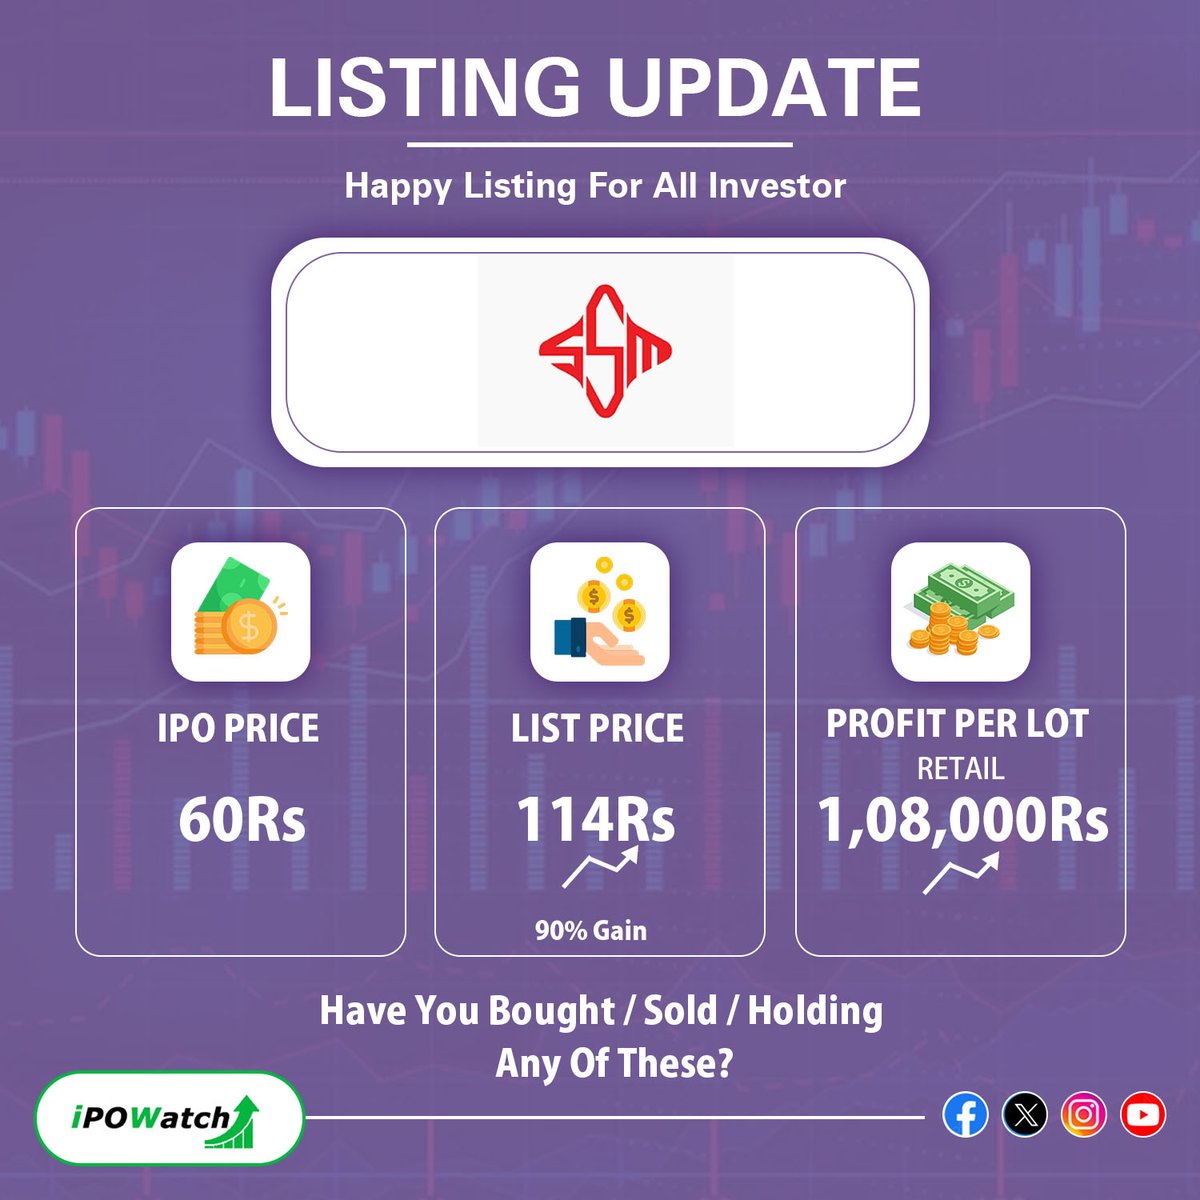 ⮞IPO Alert 🔔Today
🔸 IPO Listing today 🔔🔊

➢ Amkay Products
➢ Racks & Rollers
➢ Sai Swami Metals

Stay connected 🤝 with us for all the IPO-related updates 💪

#ipo #ipowatch #ipoupdates #ipoallotment #ipolisting #sharemarket #ipoalert